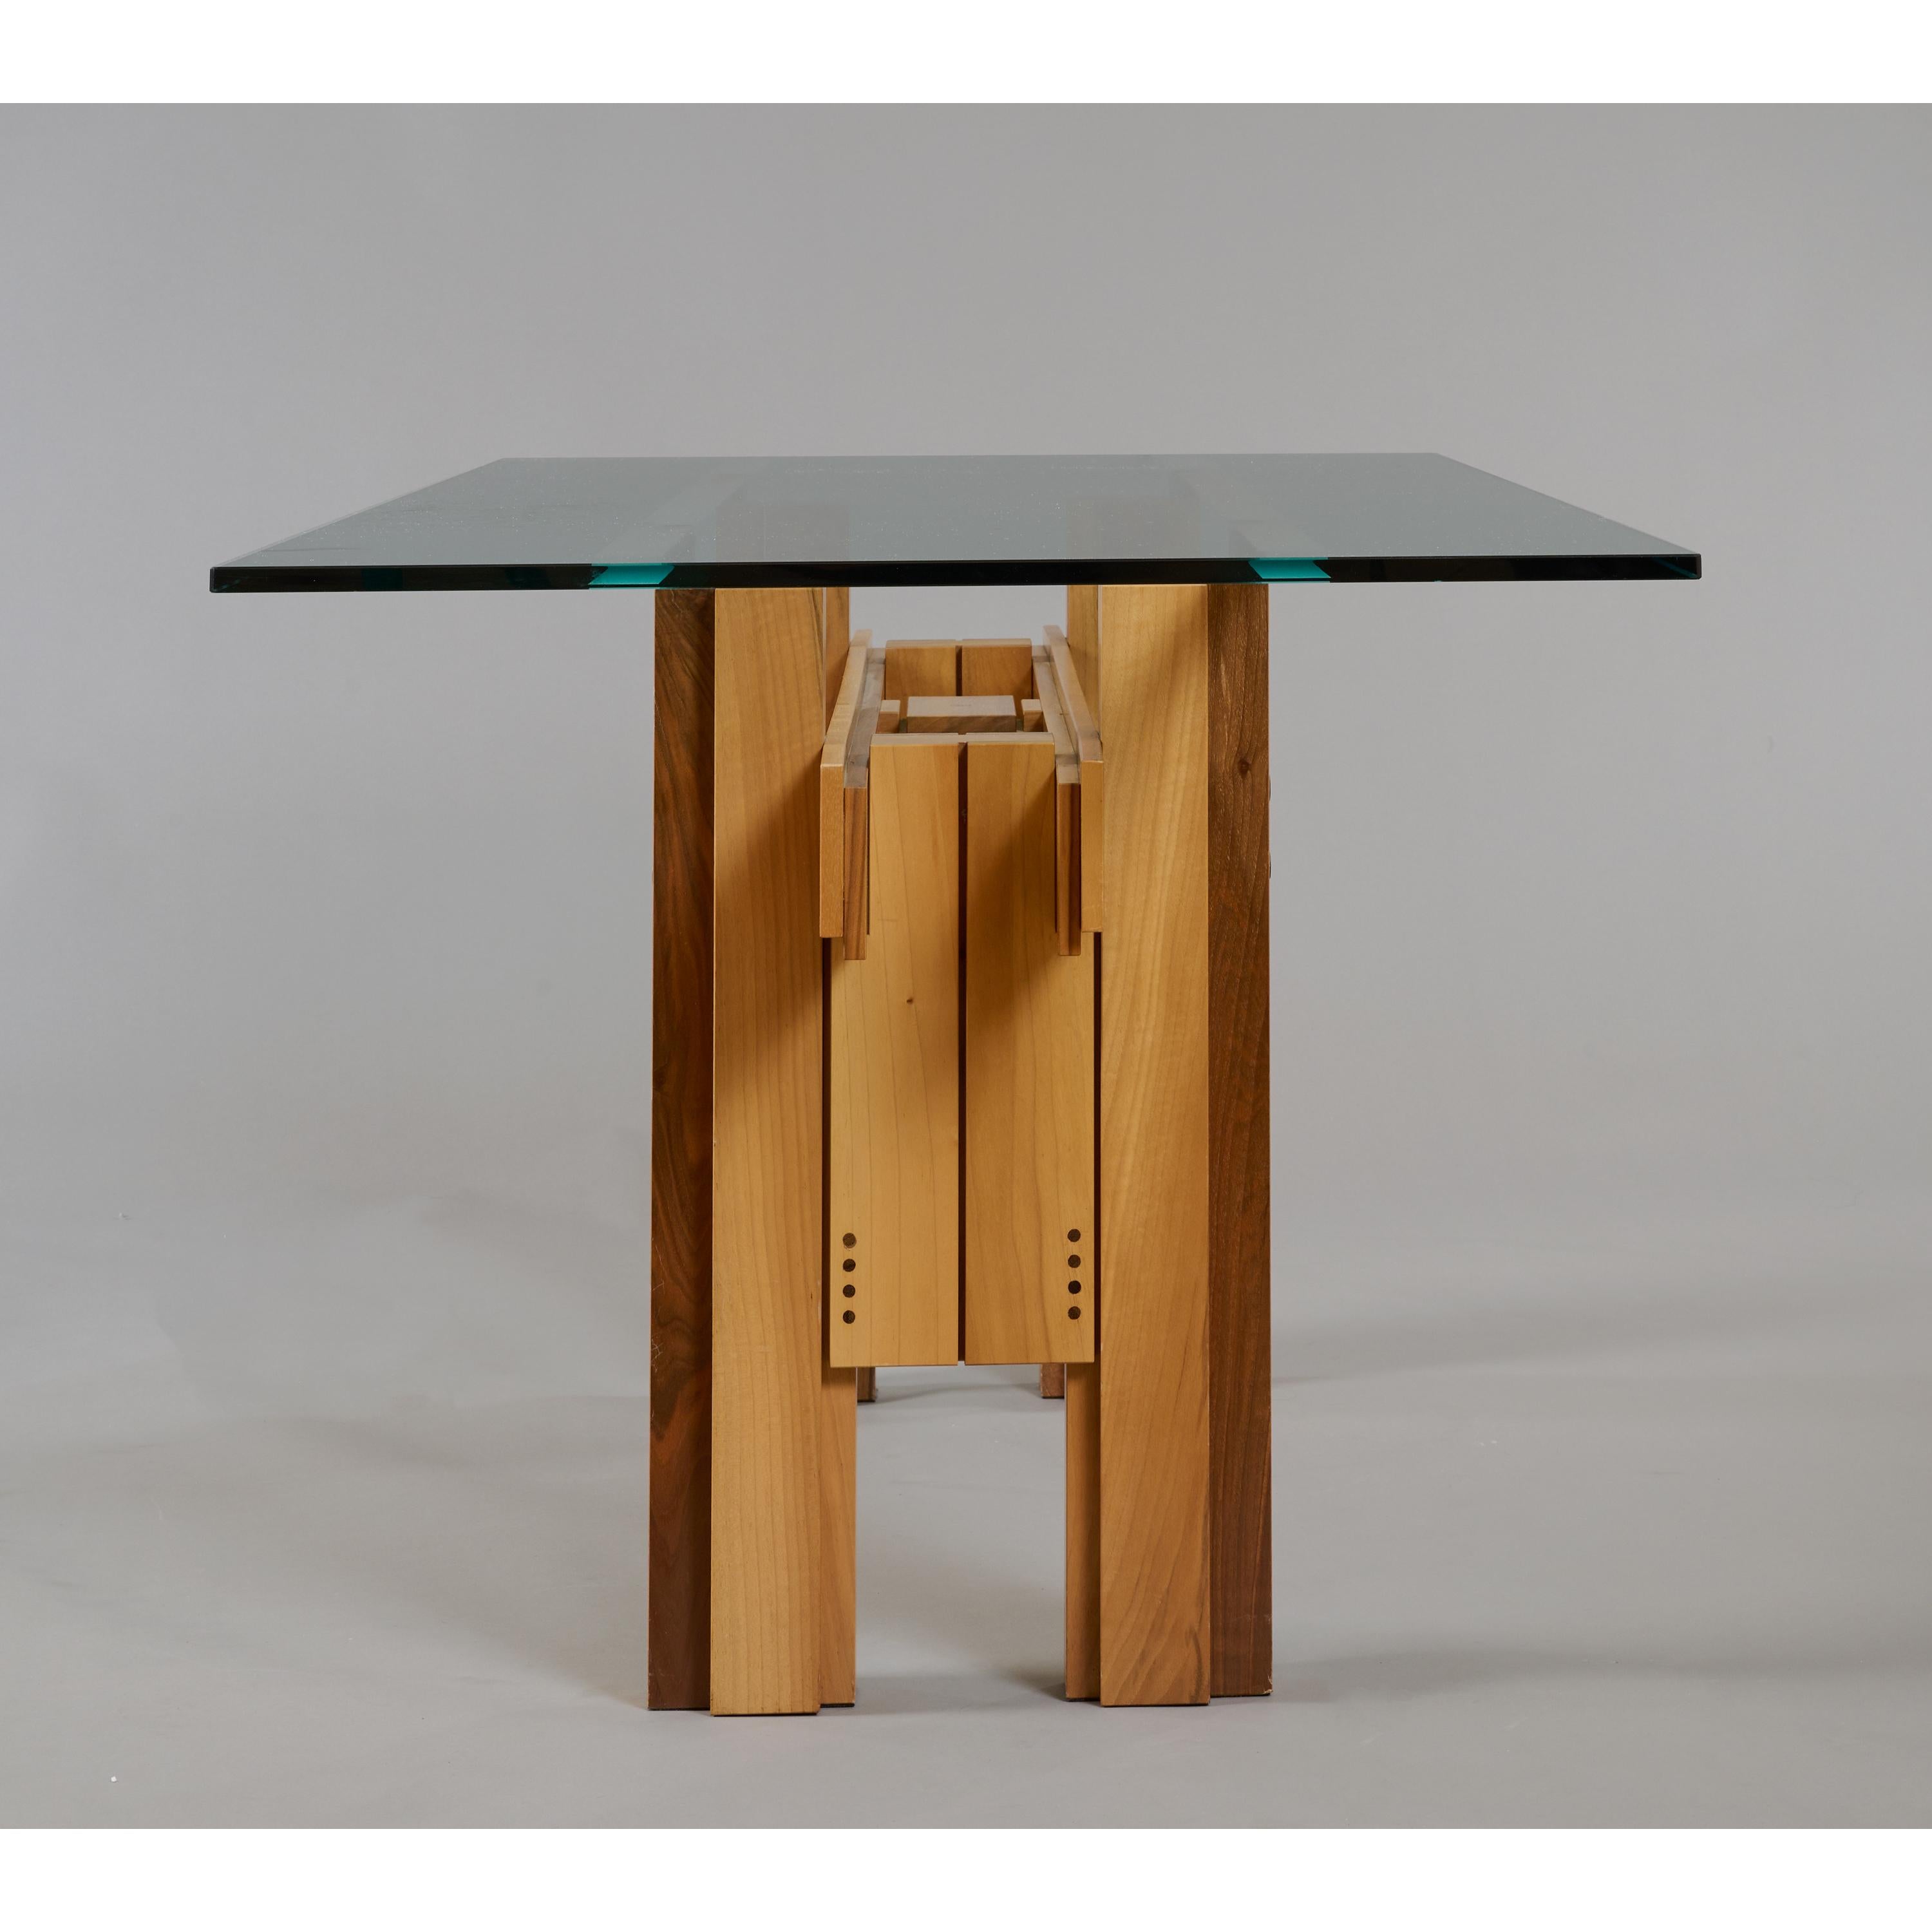 Italian Franco Poli Large Constructivist Dining Table in Wood and Glass, Italy 1970s